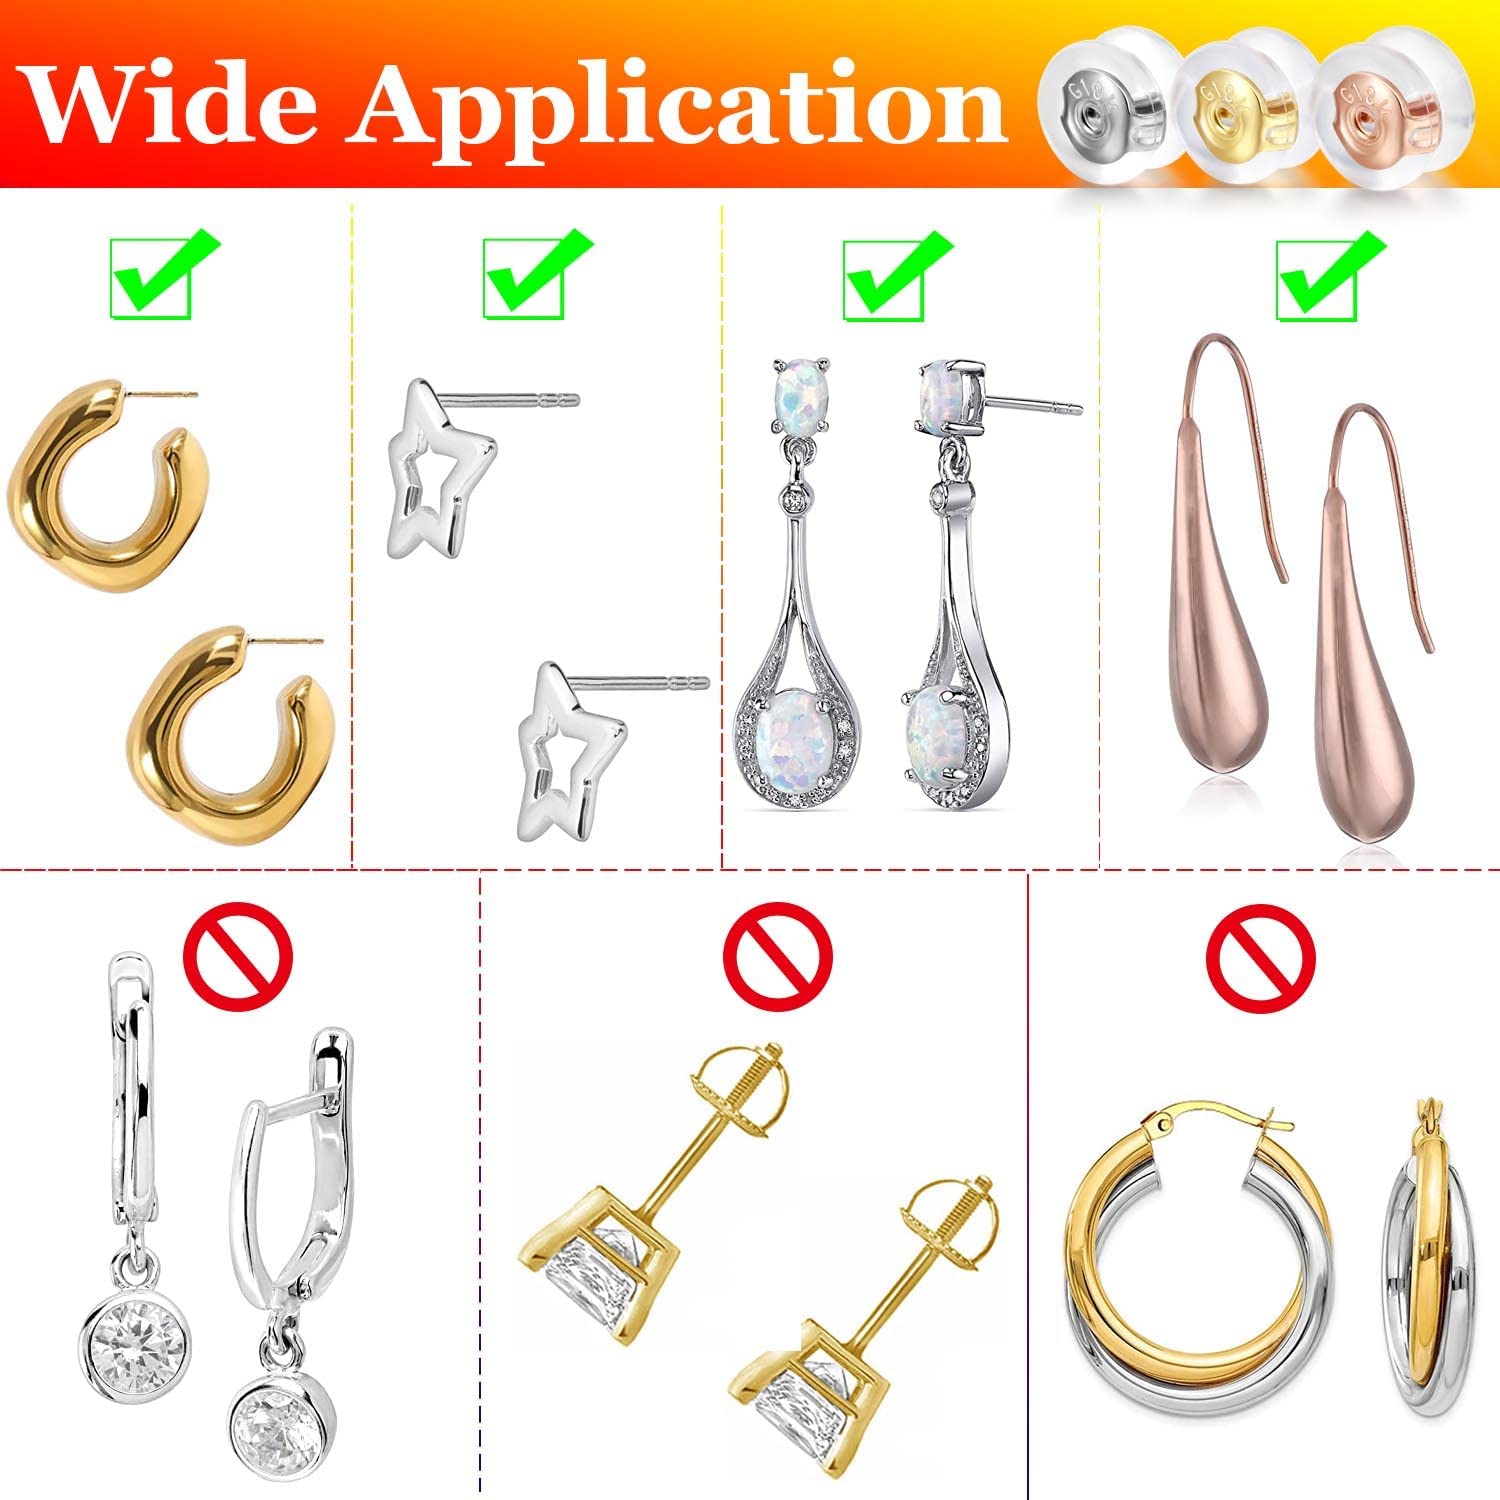 18K Gold Locking Secure Earring Backs for Studs, Silicone Earring Backs Replacements for Studs/Droopy Ears, No-Irritate Hypoallergenice Earring Backs for Adults&Kids (White Gold) - image 3 of 5